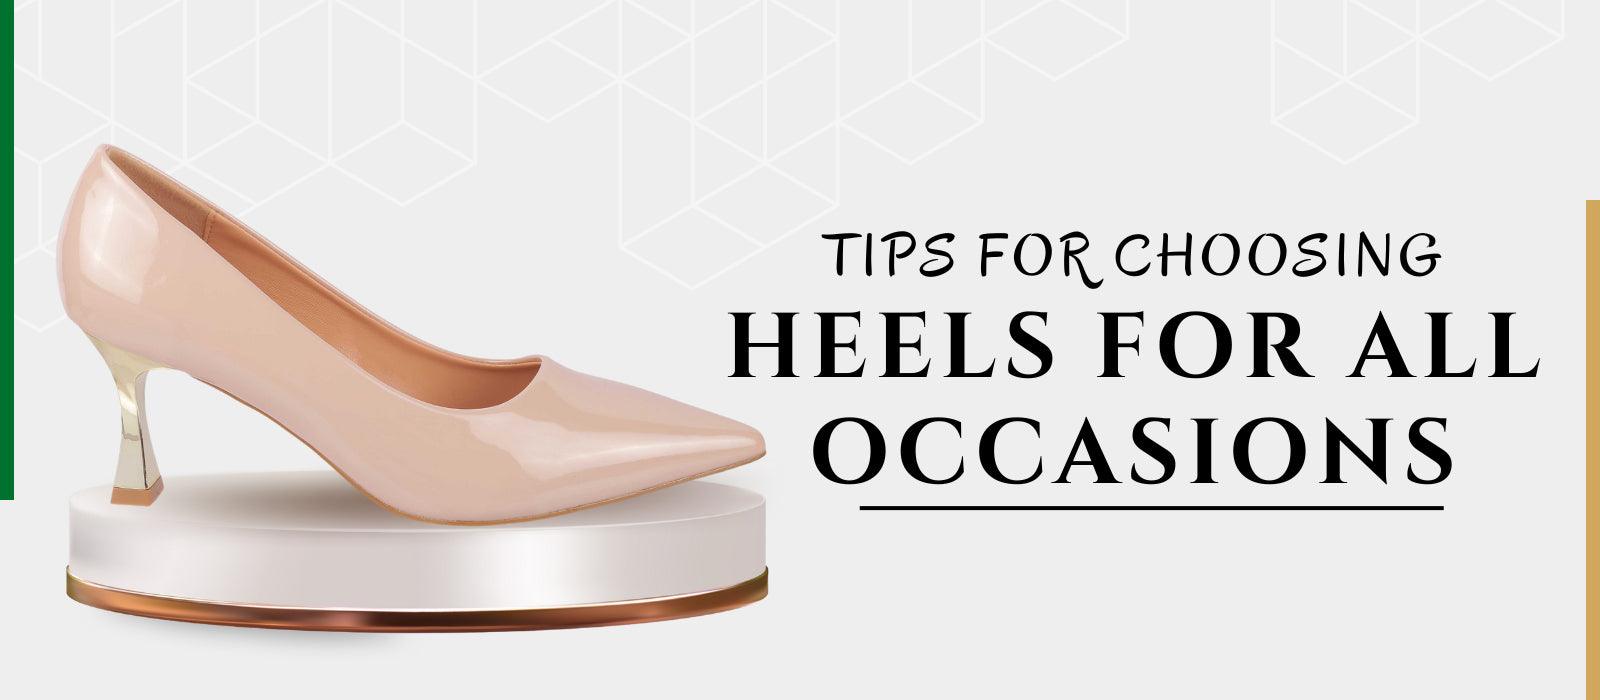 How to choose heels? – A guide to picking perfect heels! - Tresmode